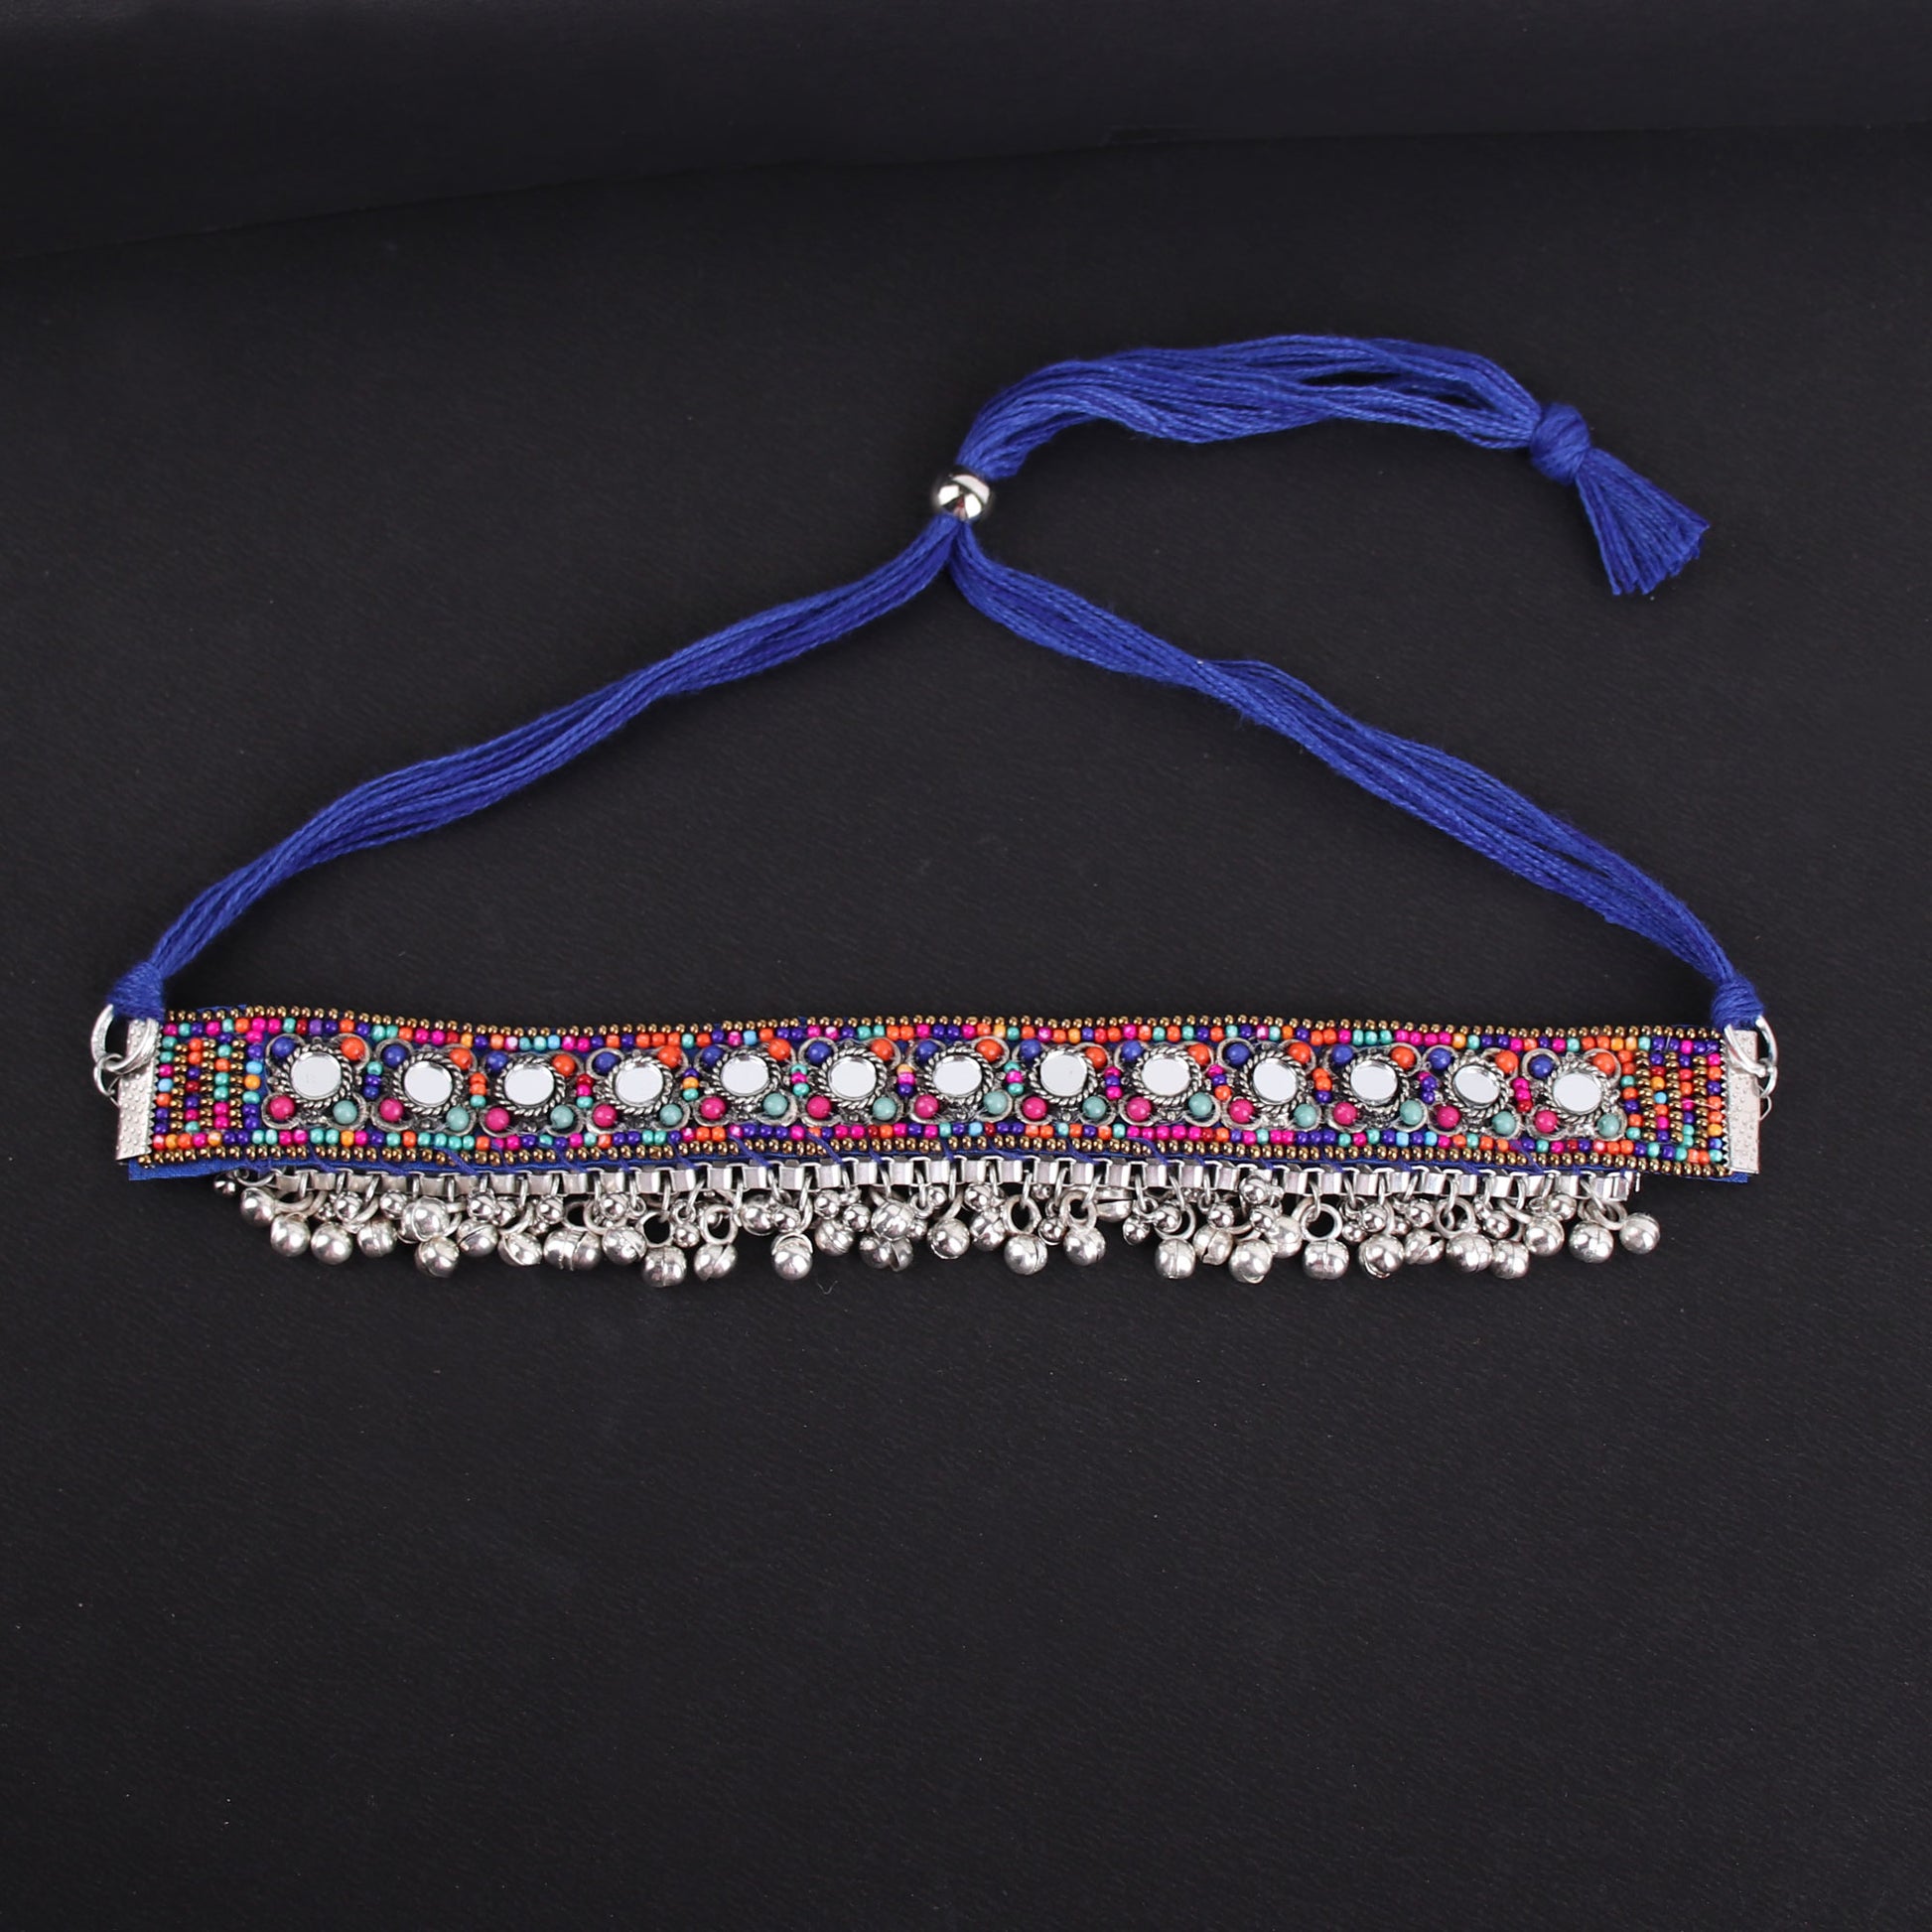 Necklace,The Splashy Colorful Beaded Choker - Cippele Multi Store